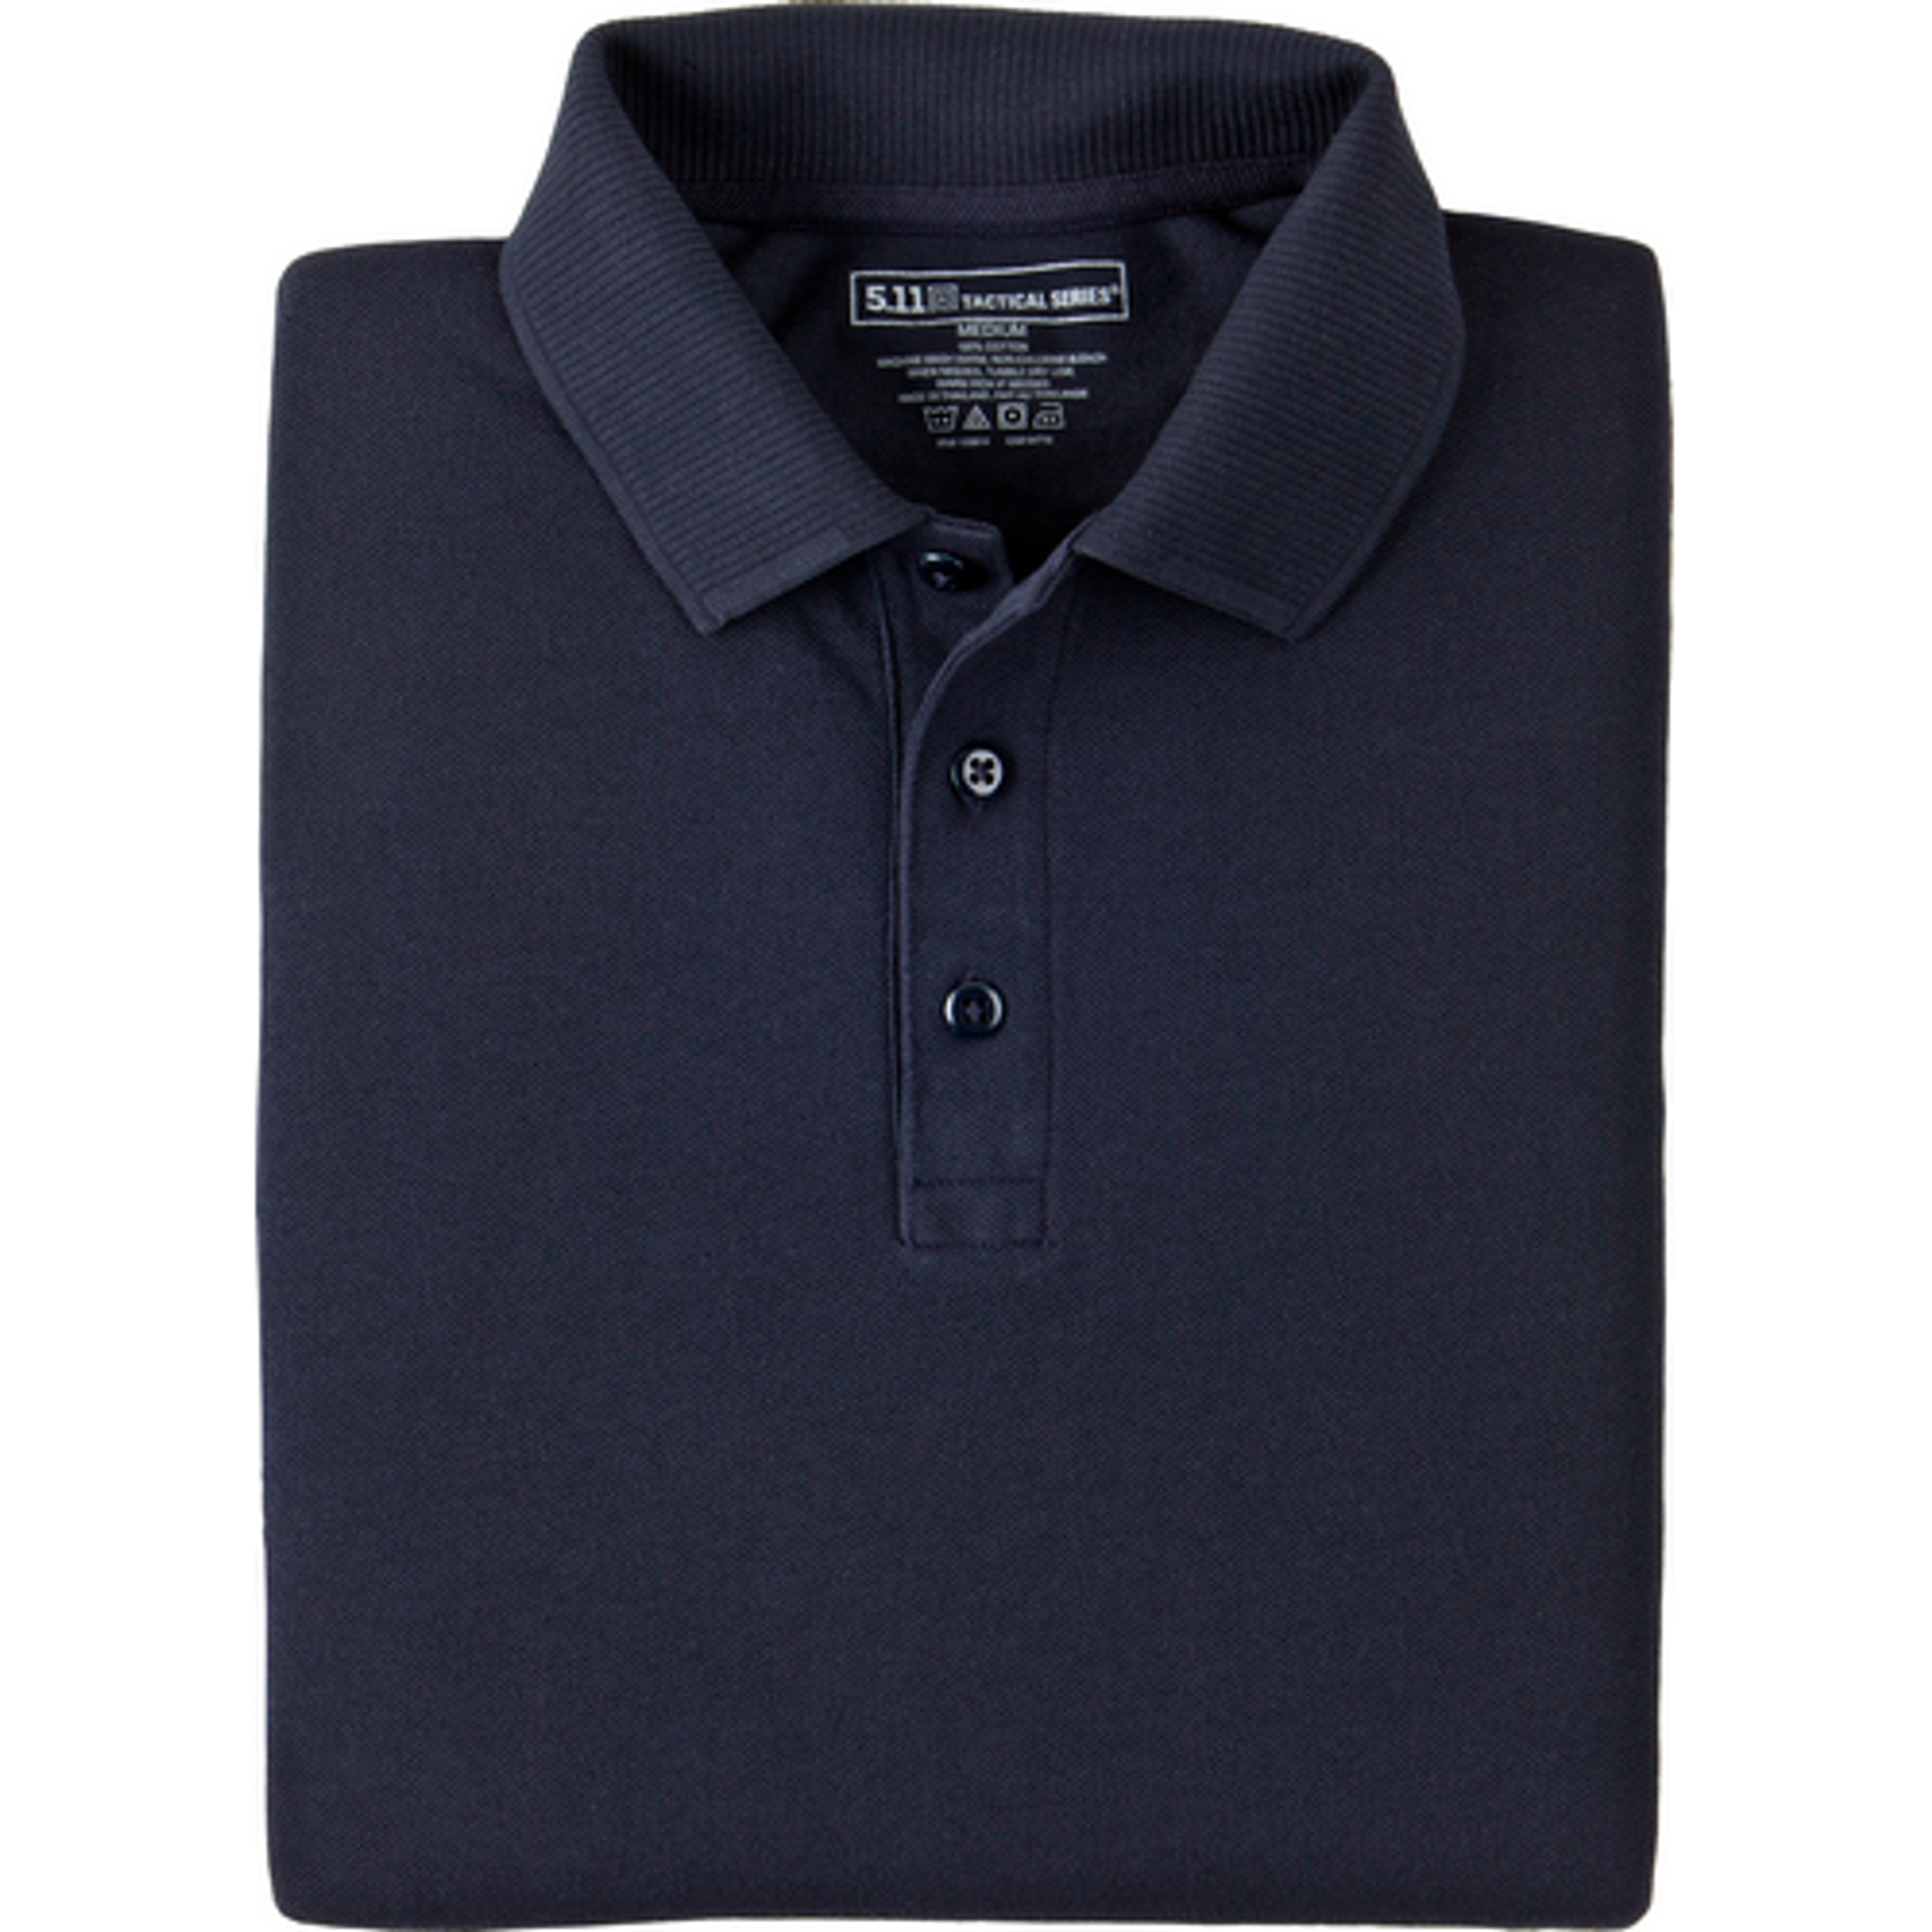 Professional S/s Polo - KR5-41060724XL